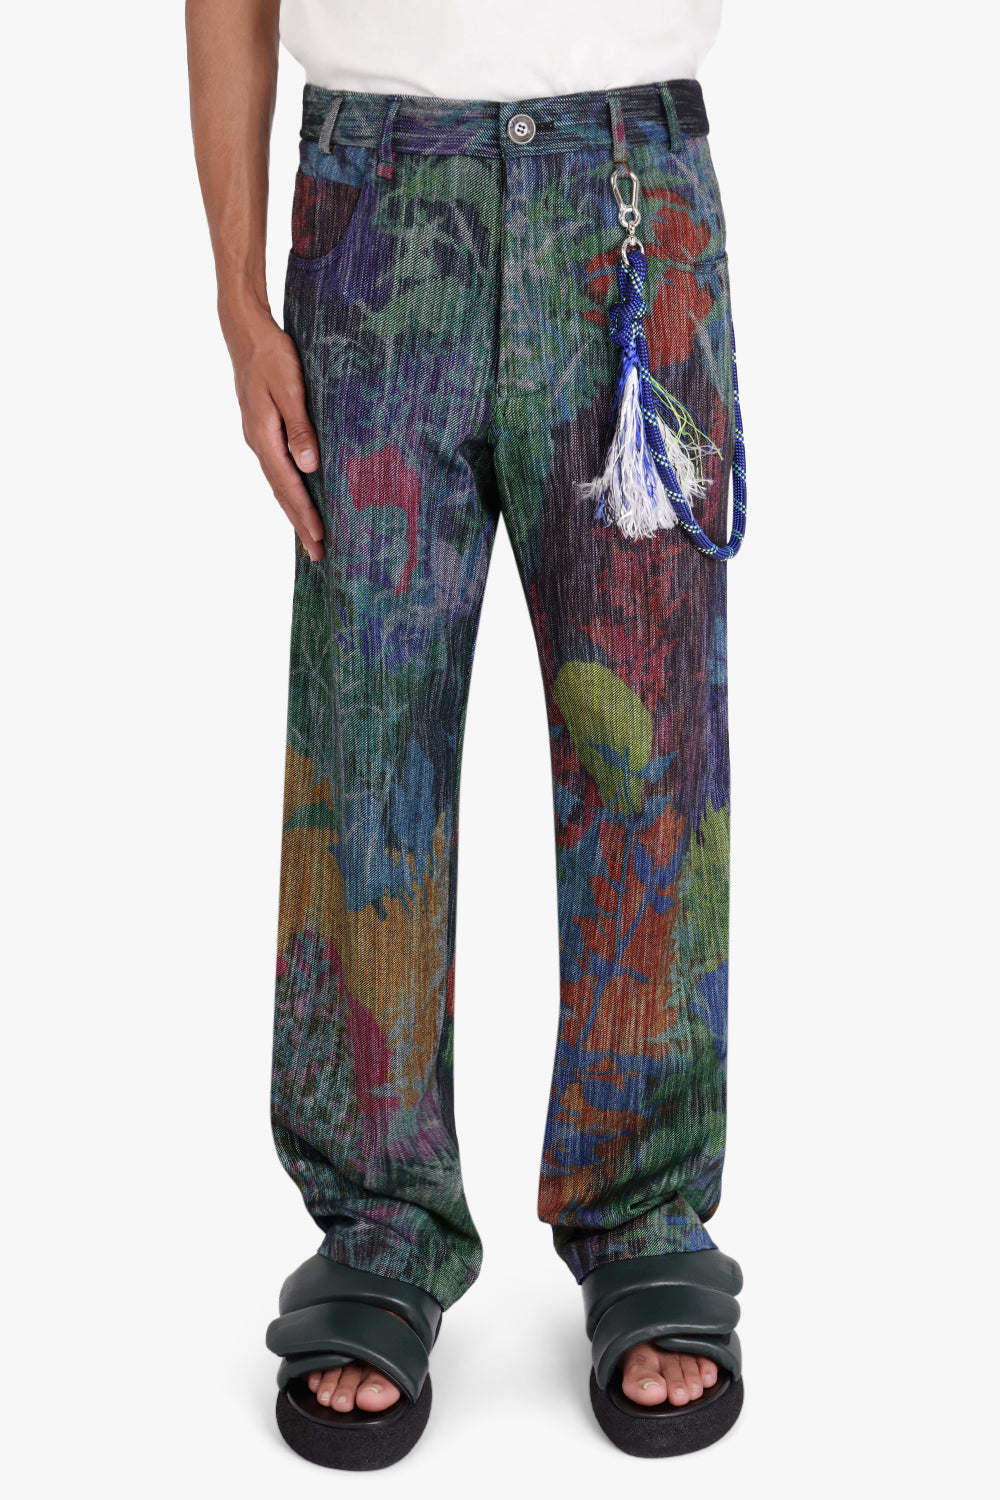 SONG FOR THE MUTE PANTS Long Work Pant | Multi